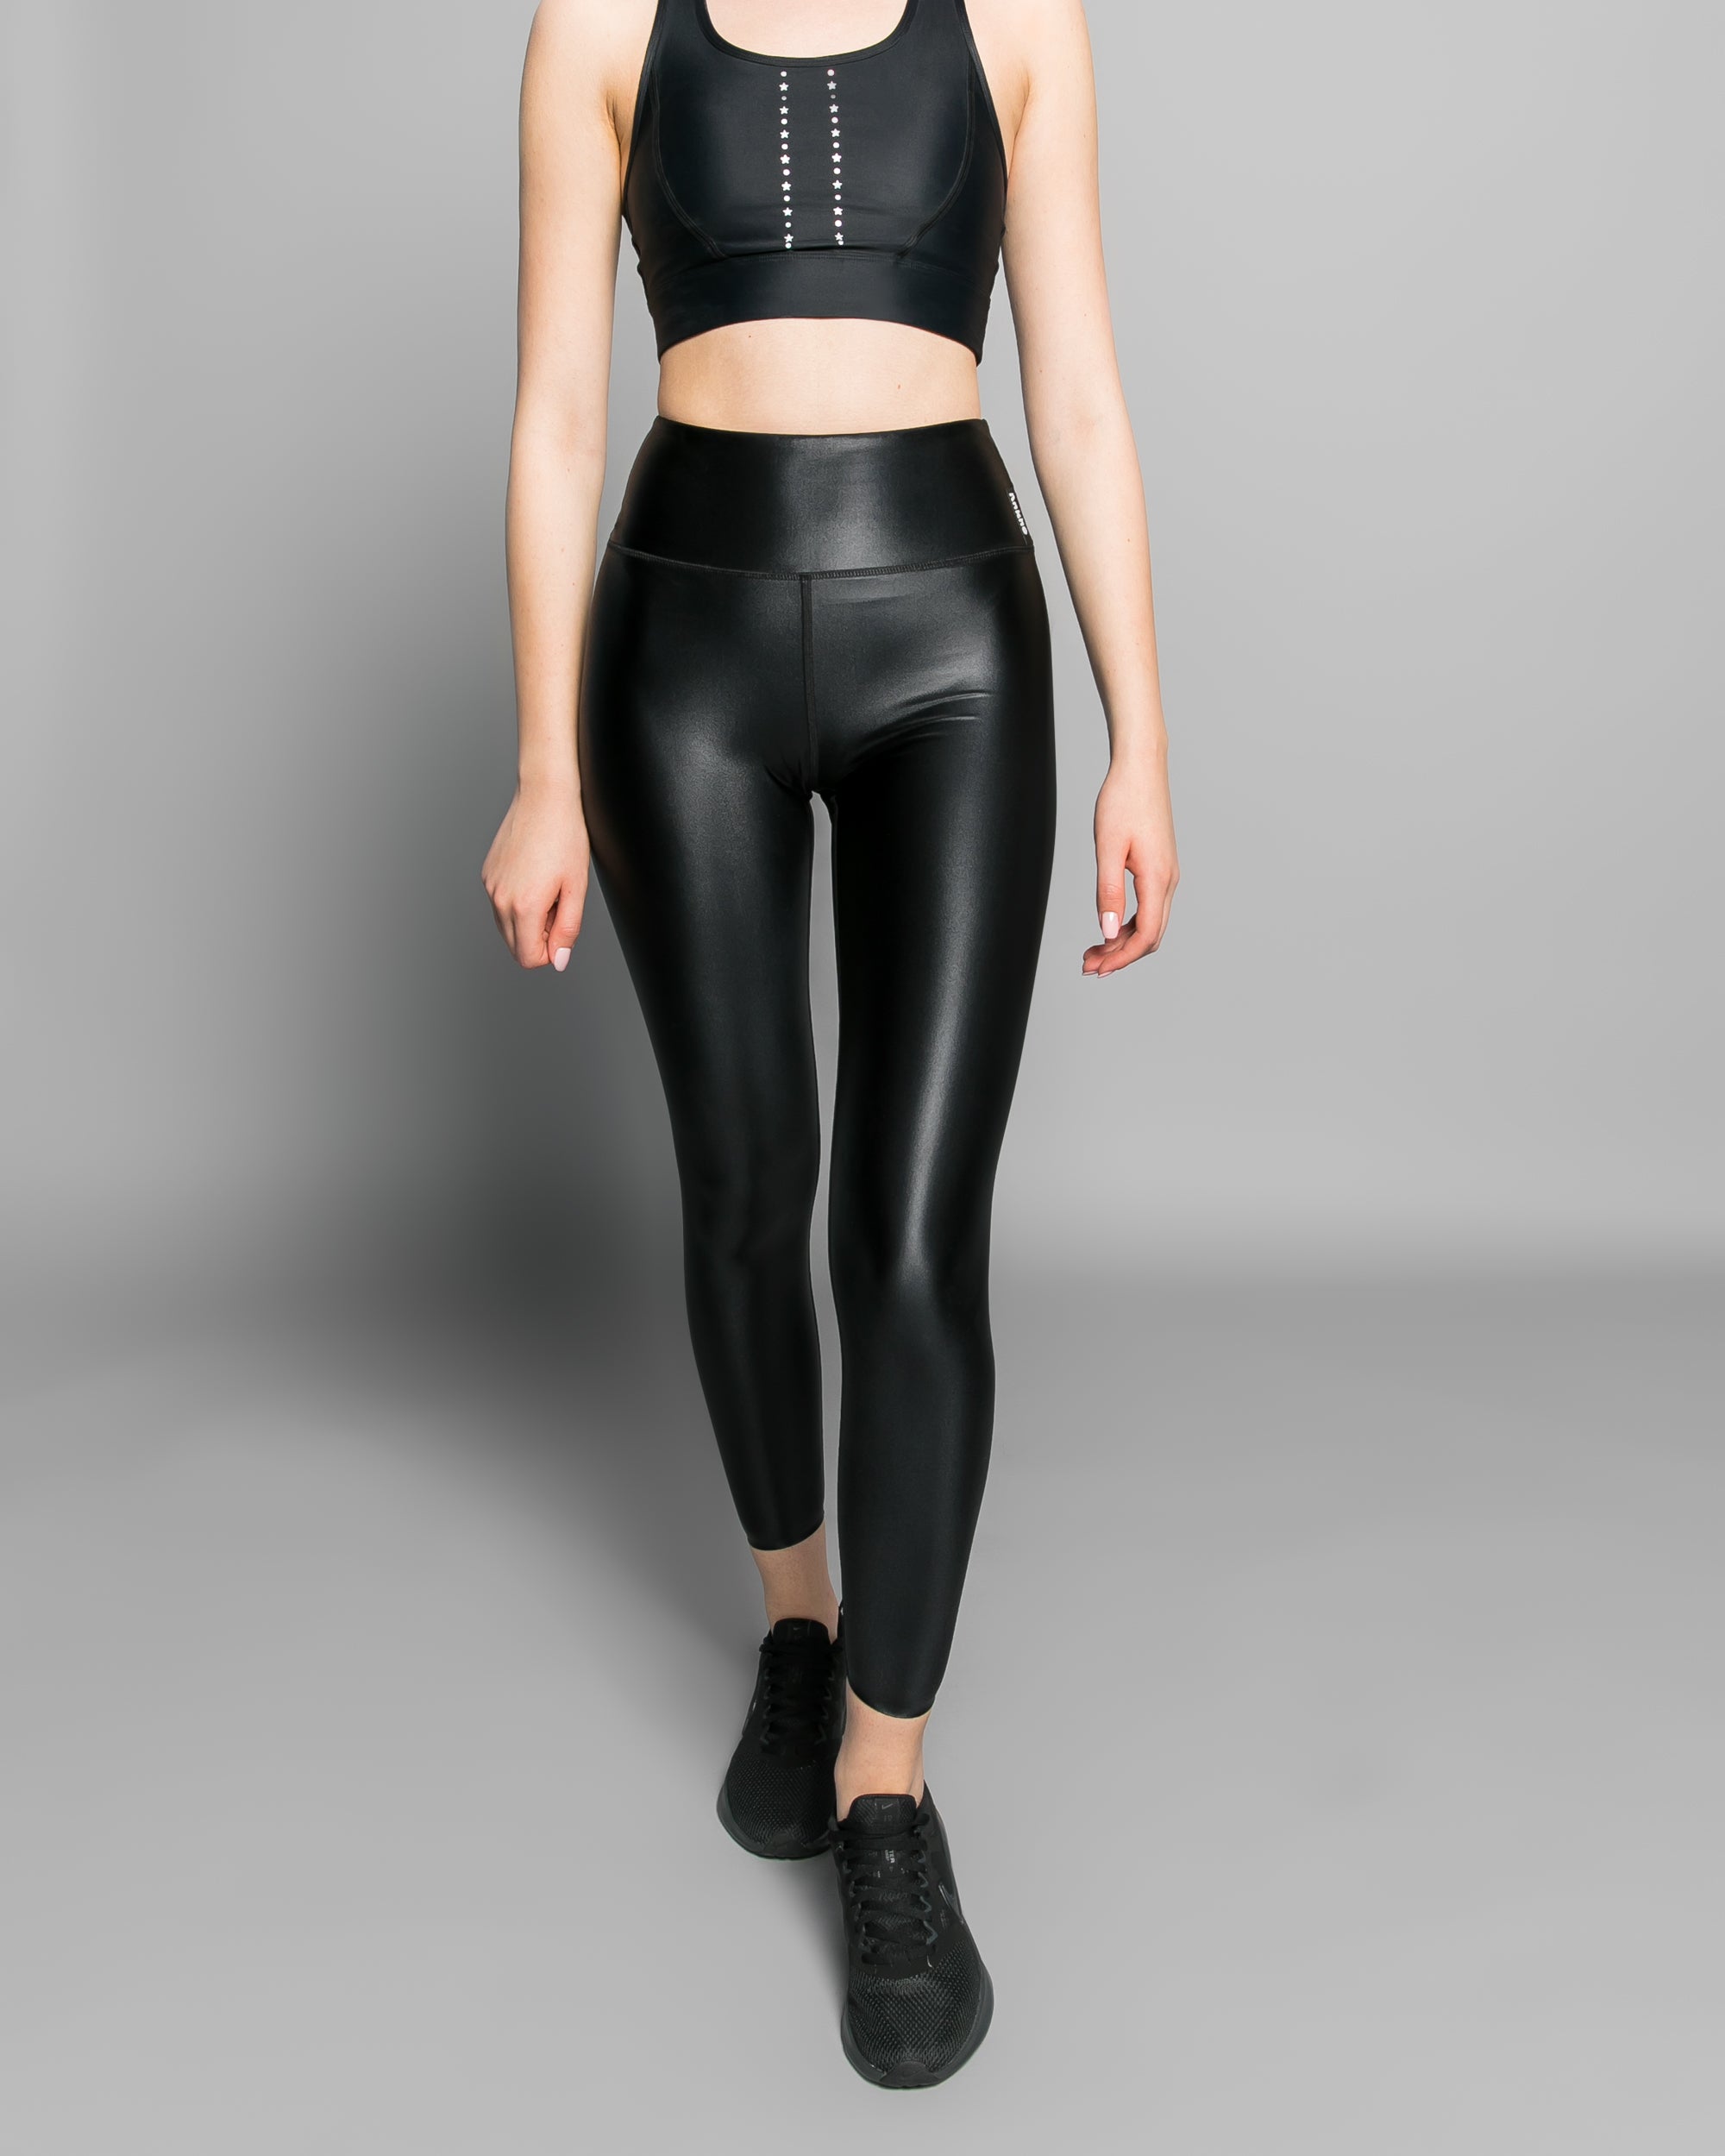 Buy and the Price of All Kinds of Shiny Workout Leggings - Arad Branding